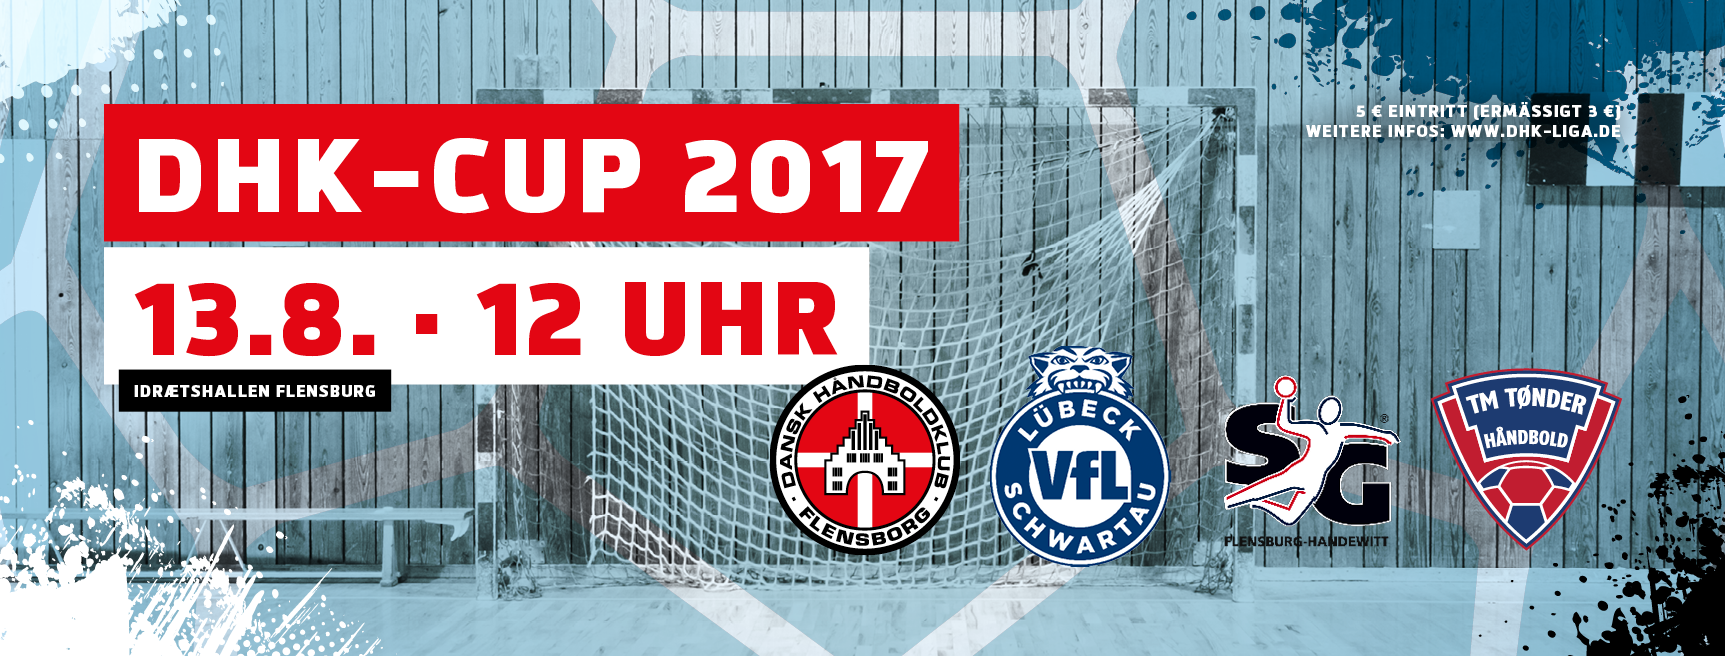 DHK-Cup 2017 am 13. August